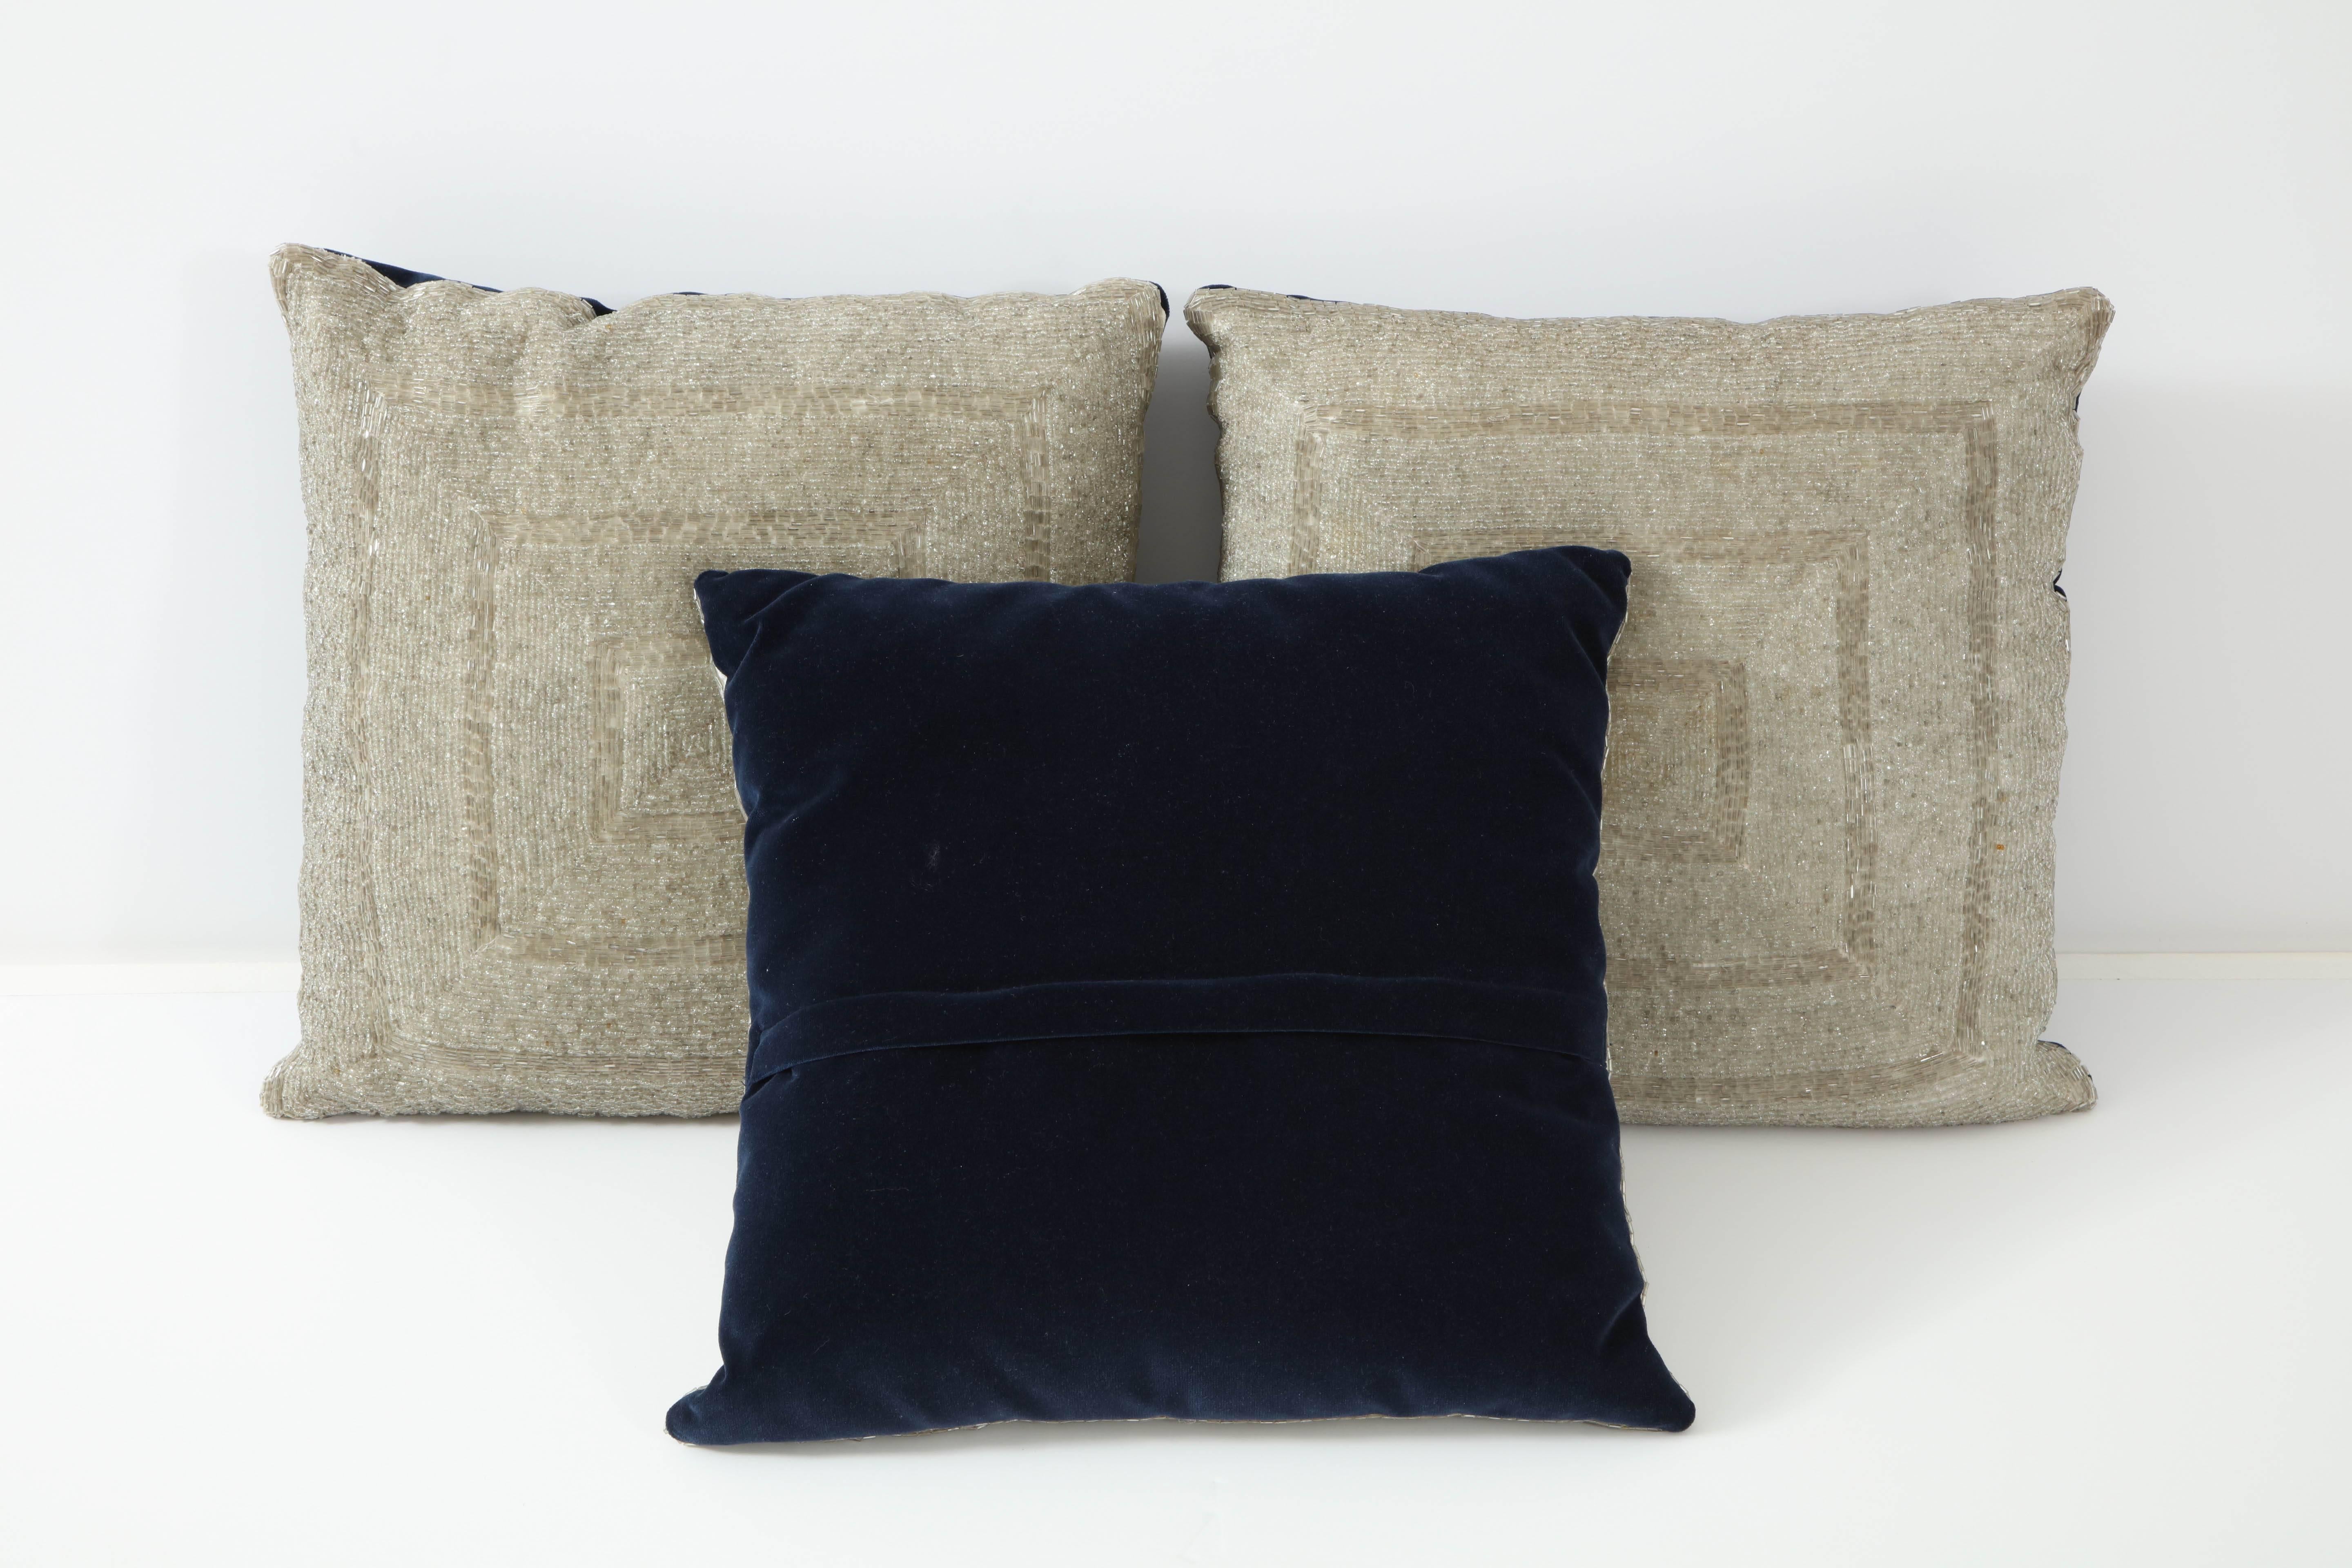 Trio of elegant vintage beaded pillows with a new luxurious midnight blue velvet back with a hidden zipper closure.